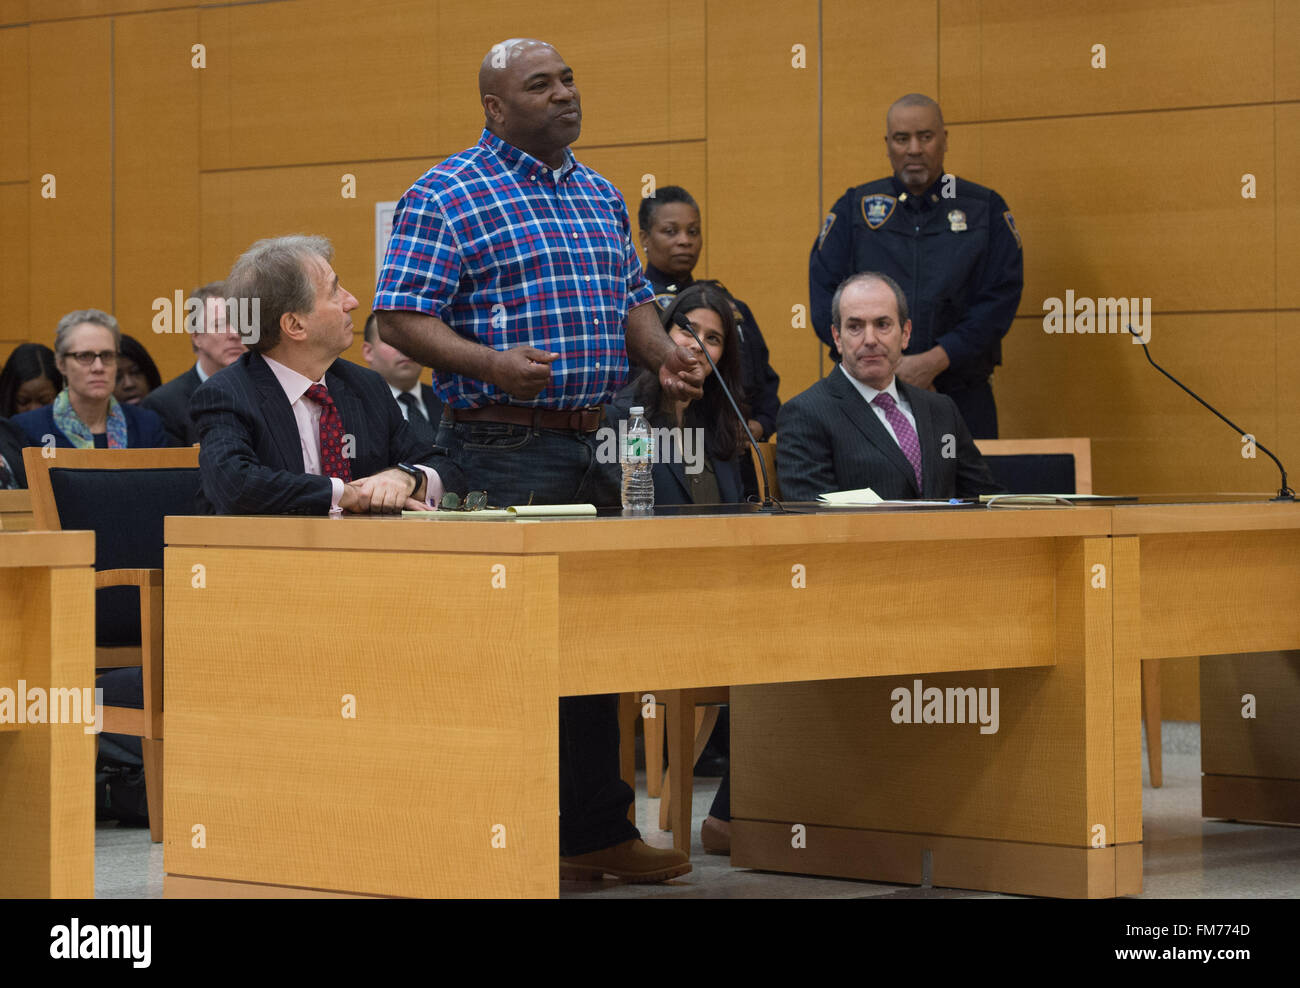 New York, NY, USA. 10th Mar, 2016. ANDRE HATCHETT speaks as Brooklyn District Attorney Ken Thompson, following an investigation by his Conviction Review Unit, vacates a second-degree murder conviction against him, Brooklyn Supreme Court, Thursday, March 10, 2016. Credit:  Bryan Smith/ZUMA Wire/Alamy Live News Stock Photo